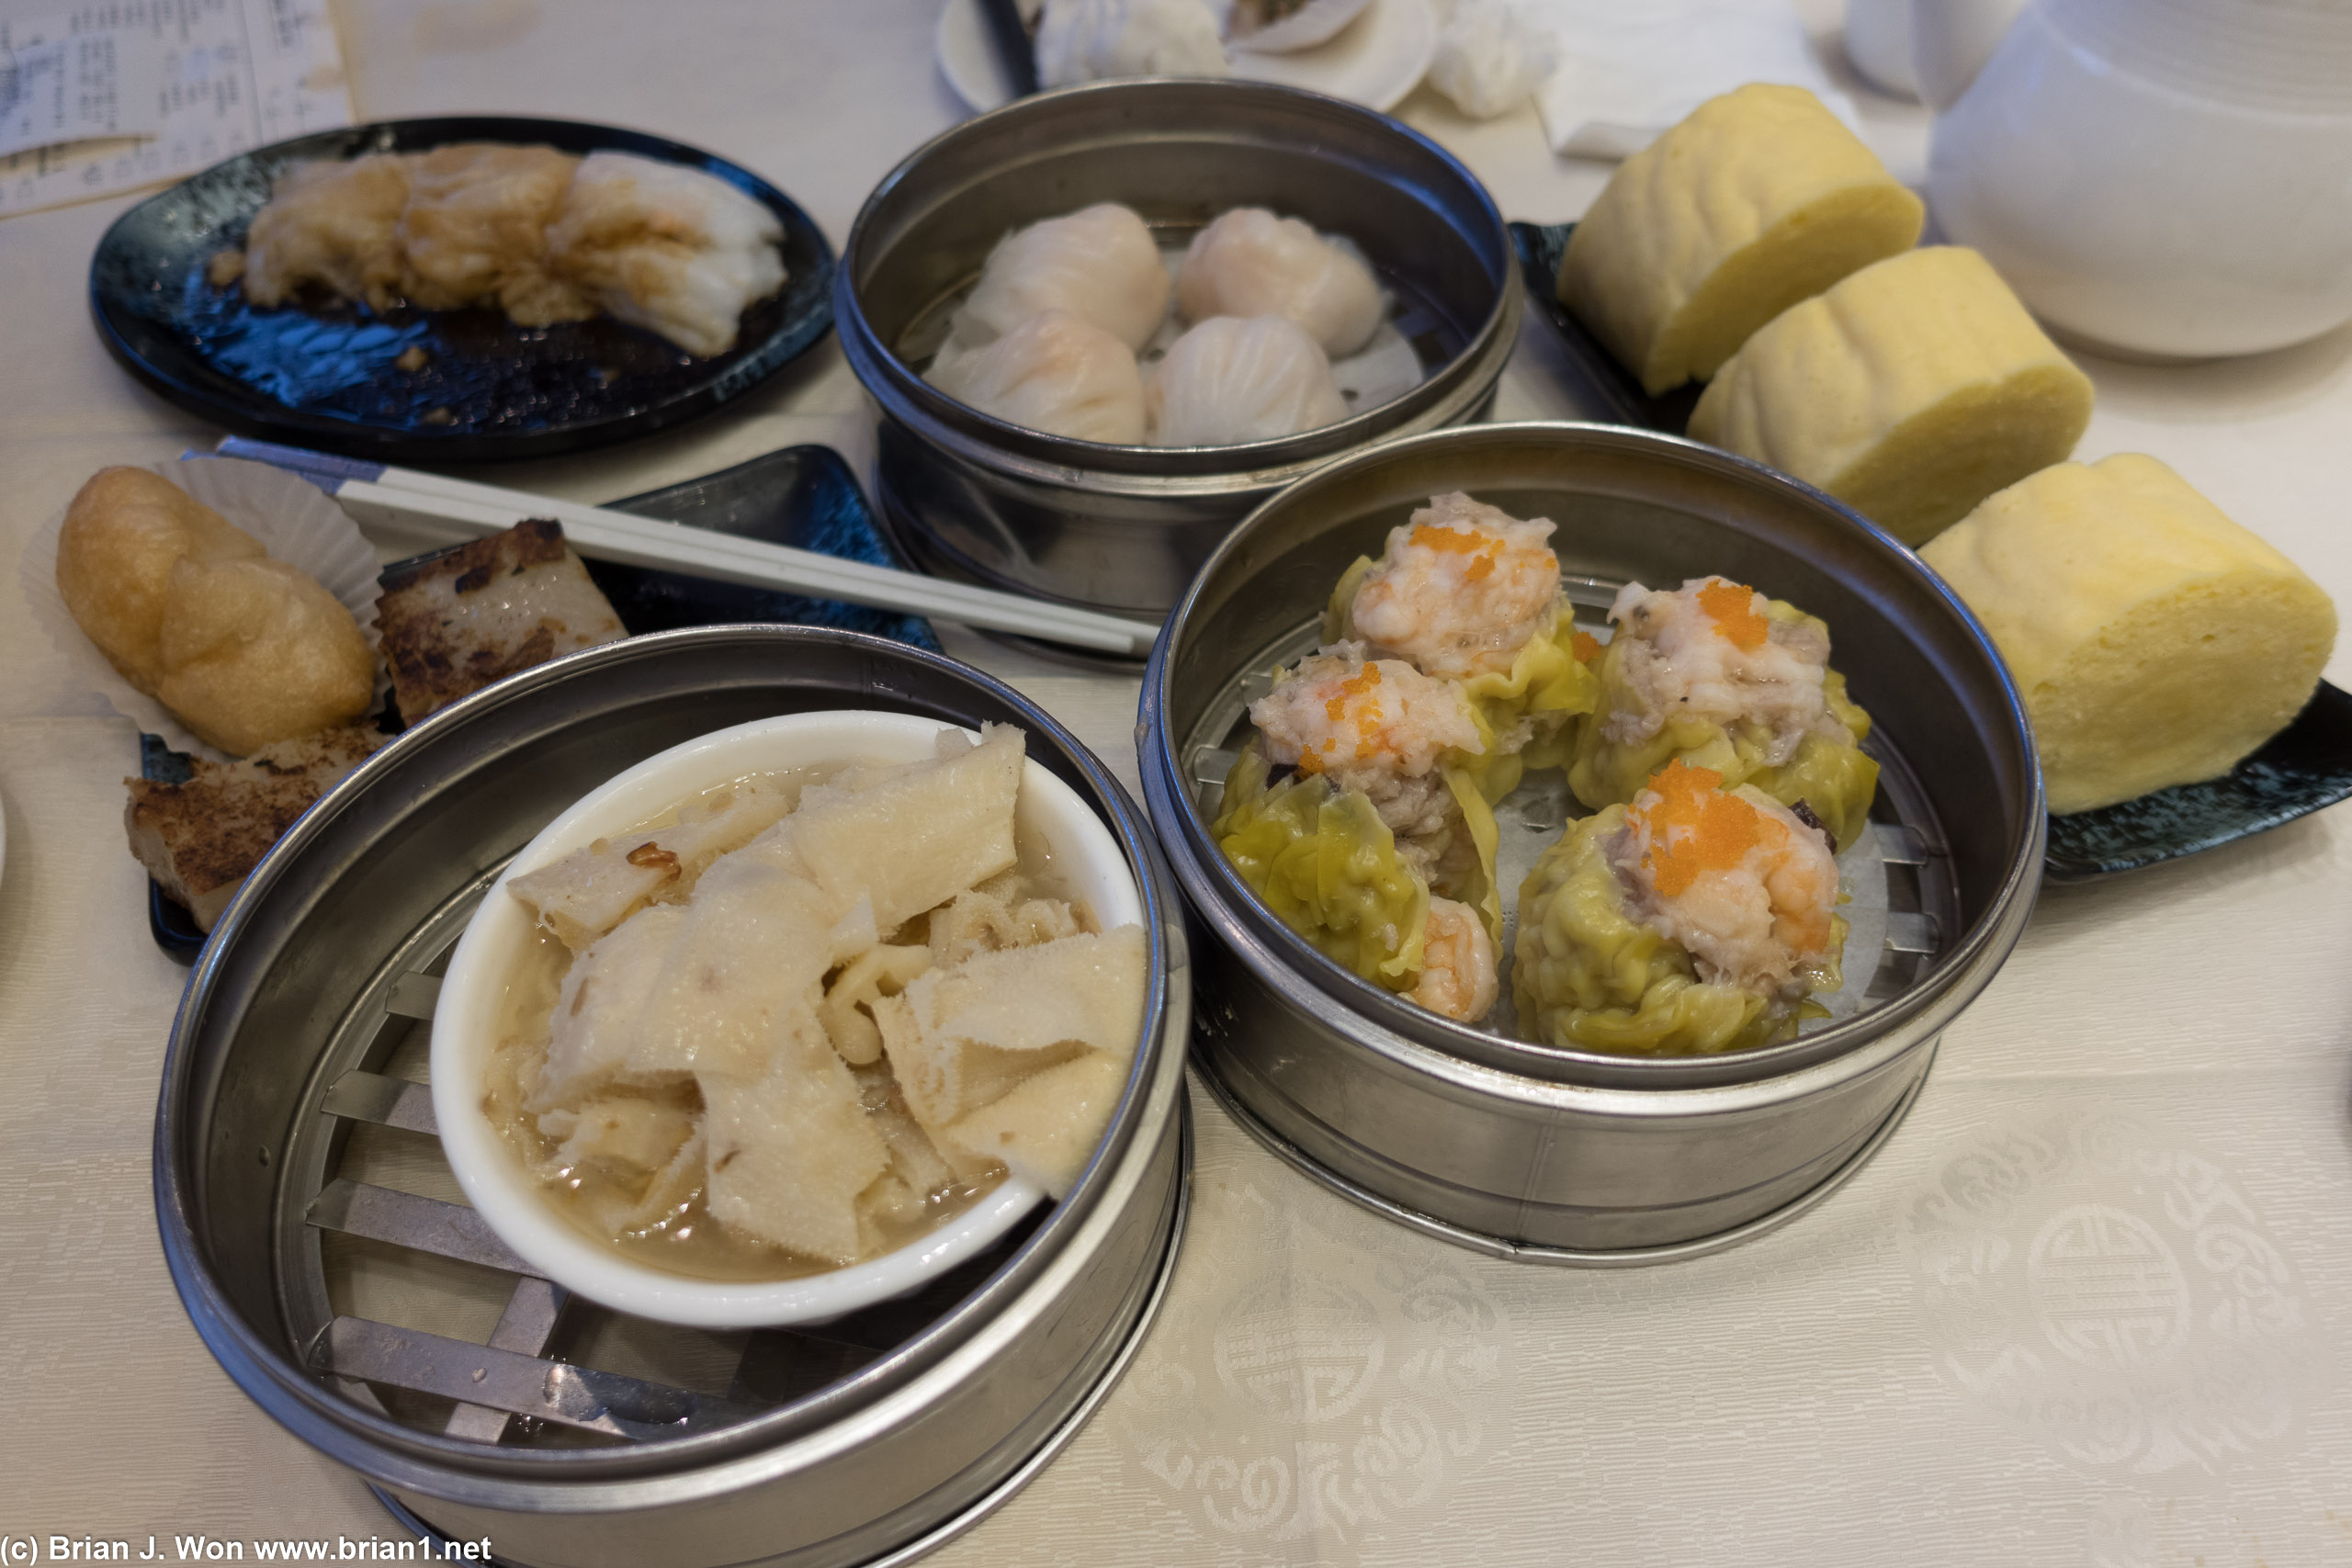 The full spread-- and yes, the har gow were tasty too, but not as crazy as the shu mai.